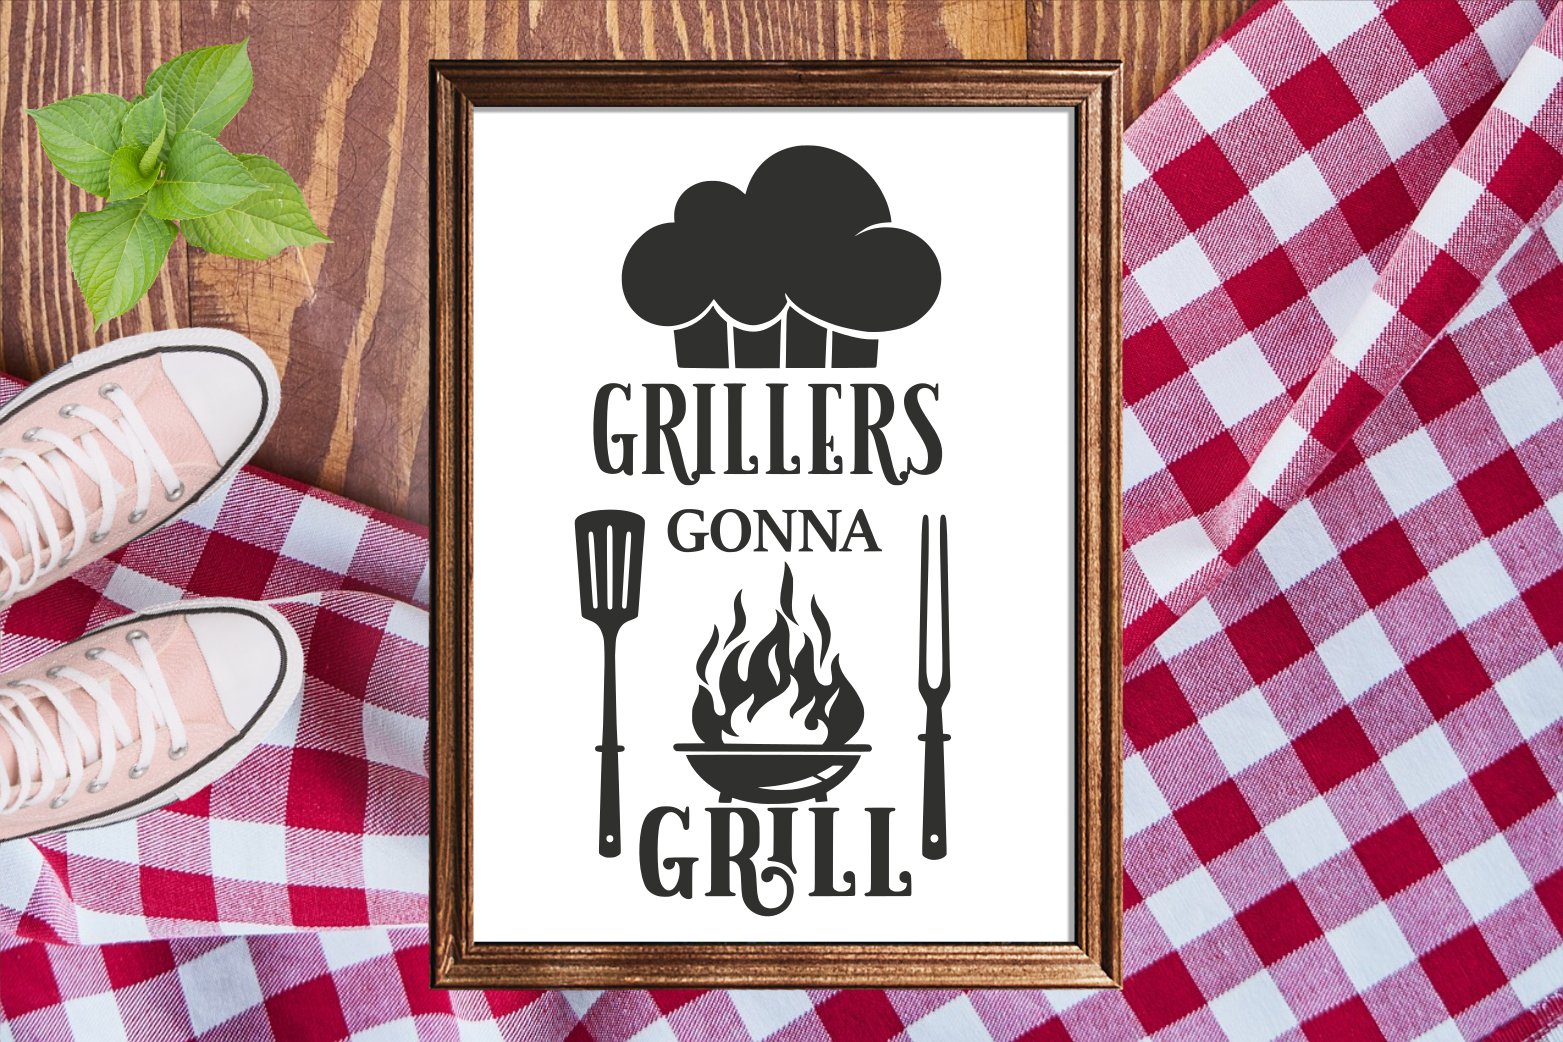 grillers gonna grill 1 393